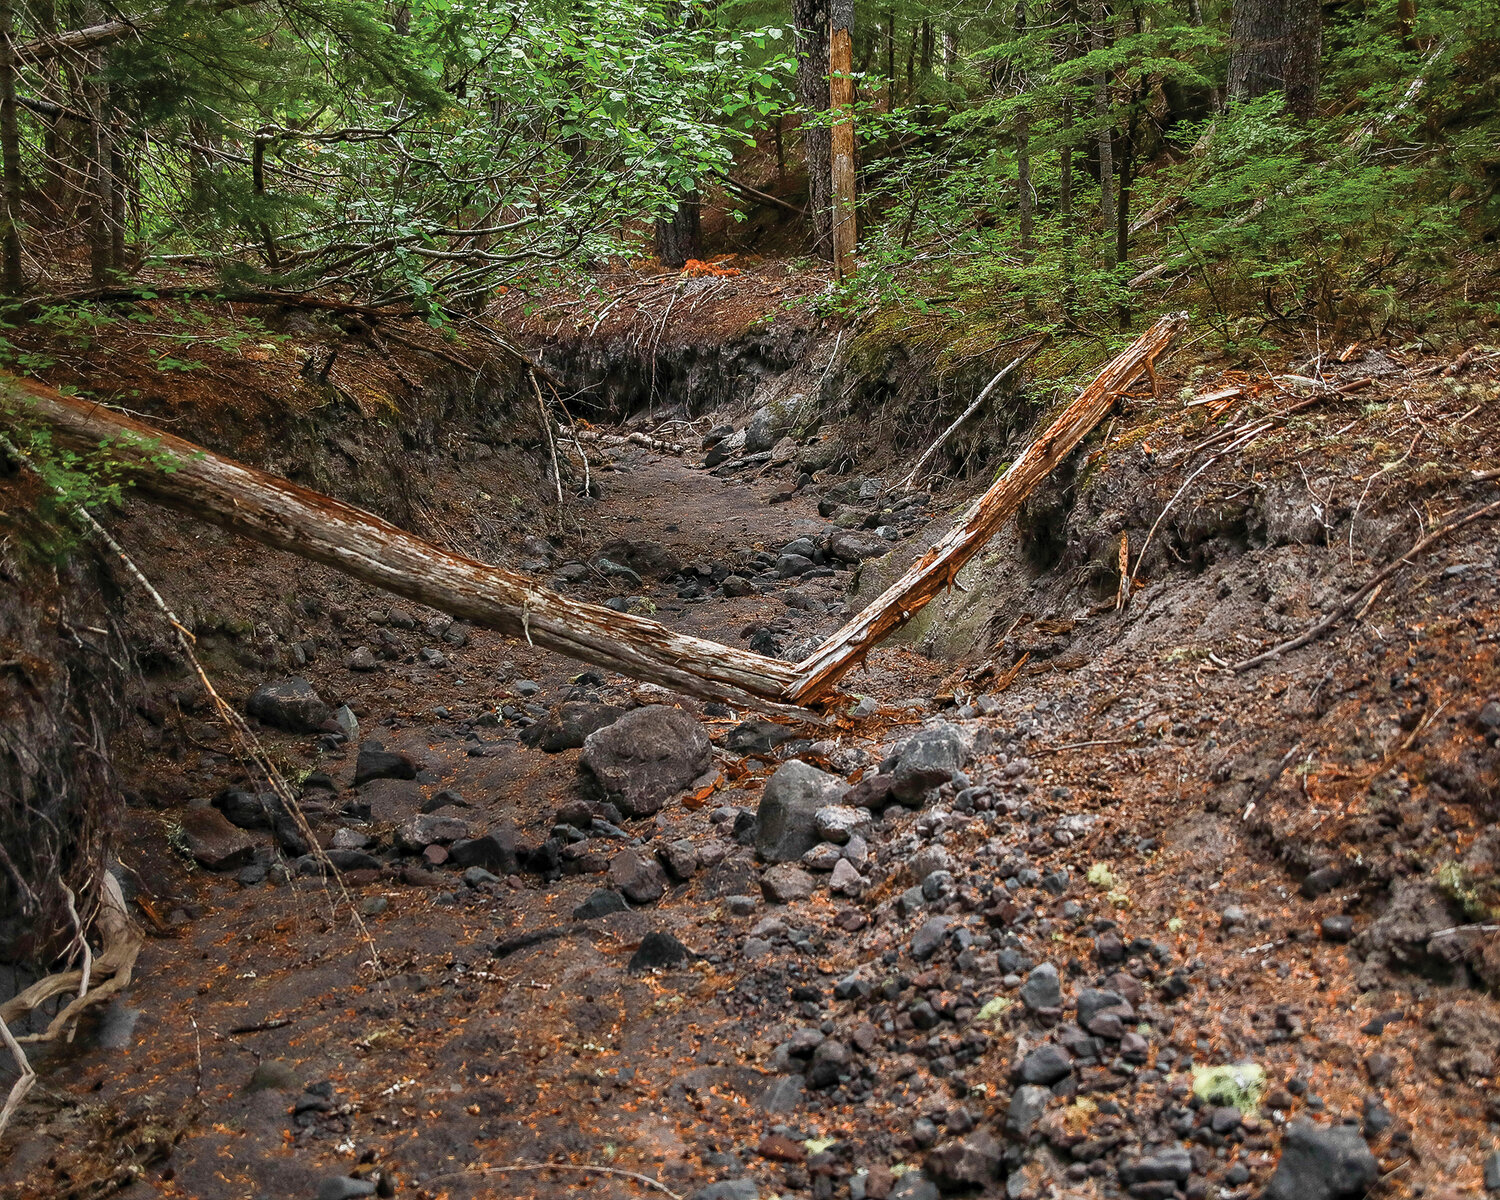 The beginning trail at Goat Marsh crosses through a creek bed that was bone dry on Thursday, Aug. 10.